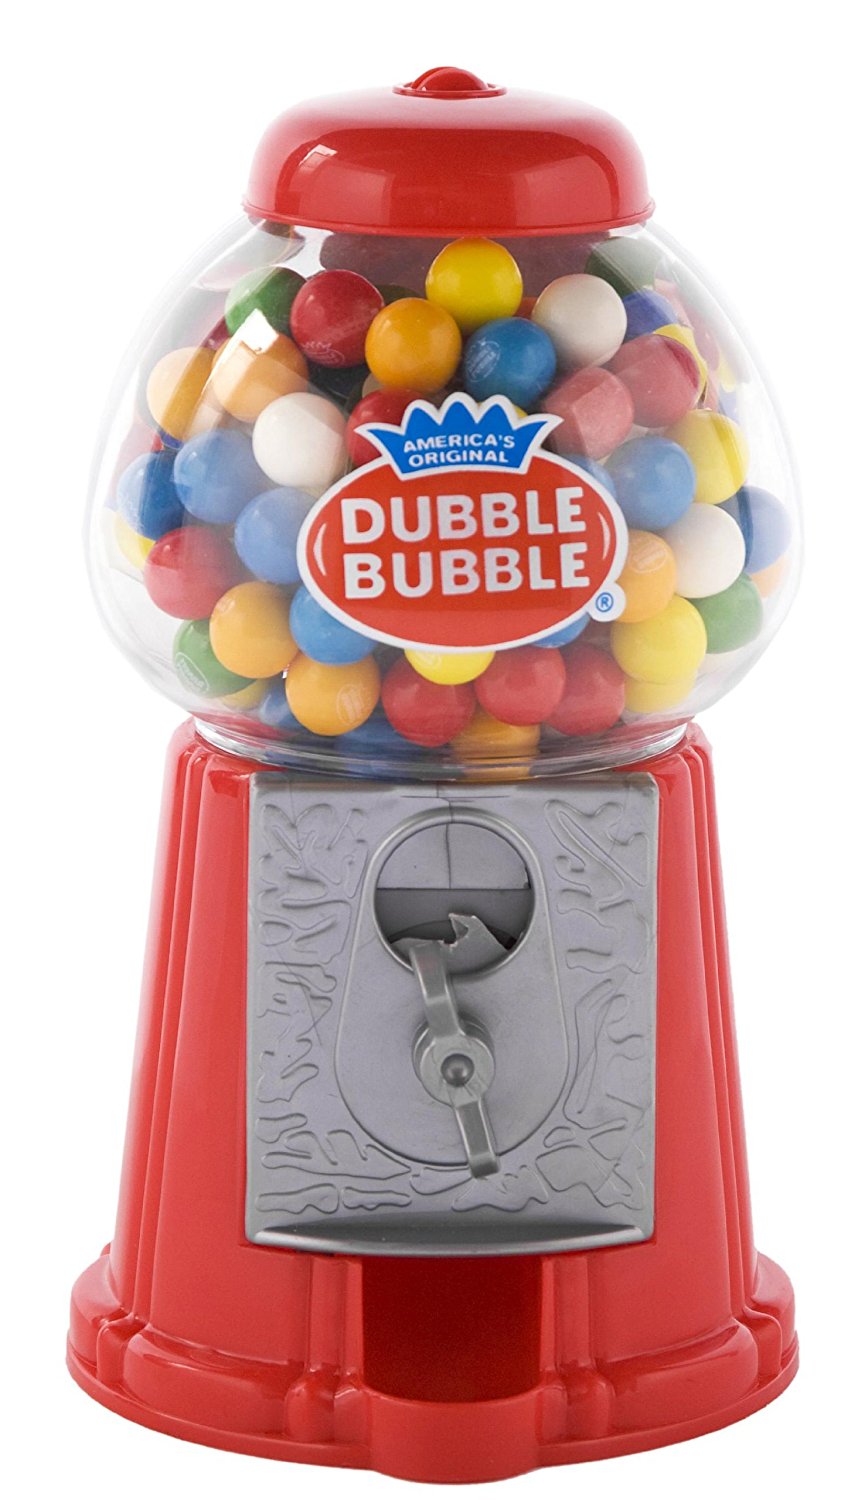 Classic Dubble Bubble Gumball Coin Bank – Only $7.15!